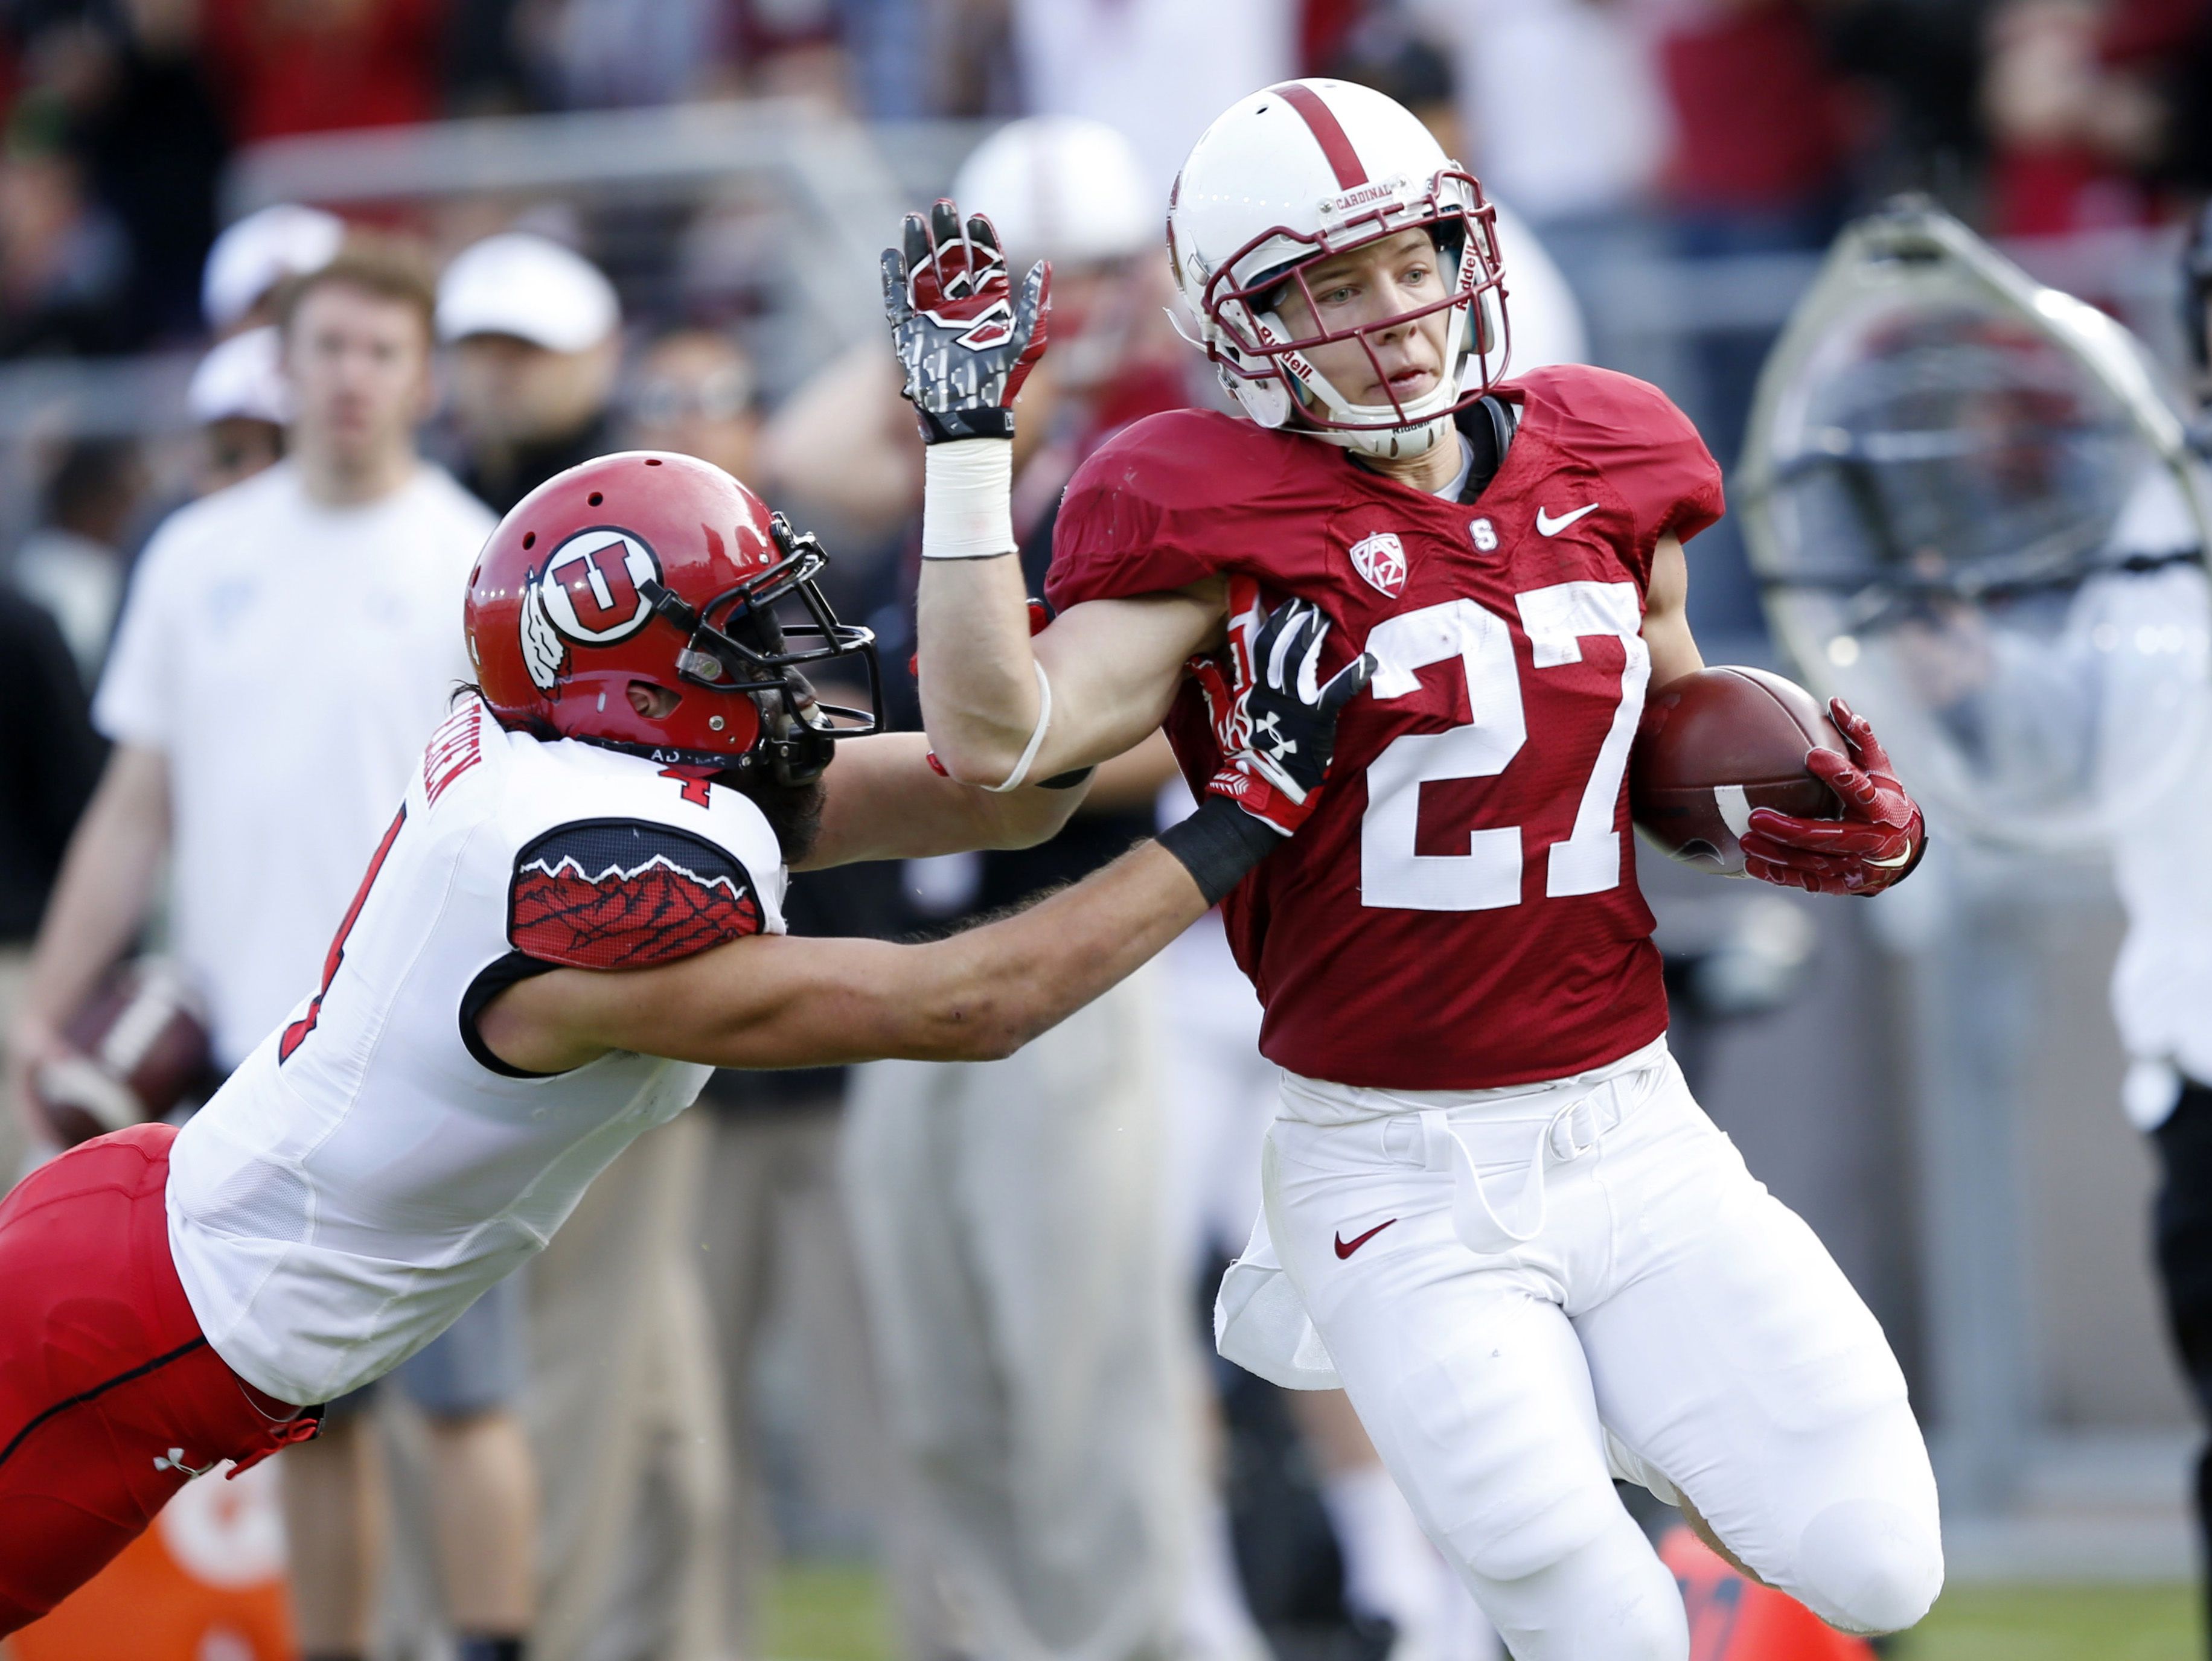 Christian McCaffery looks to be next in a long line of powerful Stanford running backs, none of whom have made big impacts in the NFL.